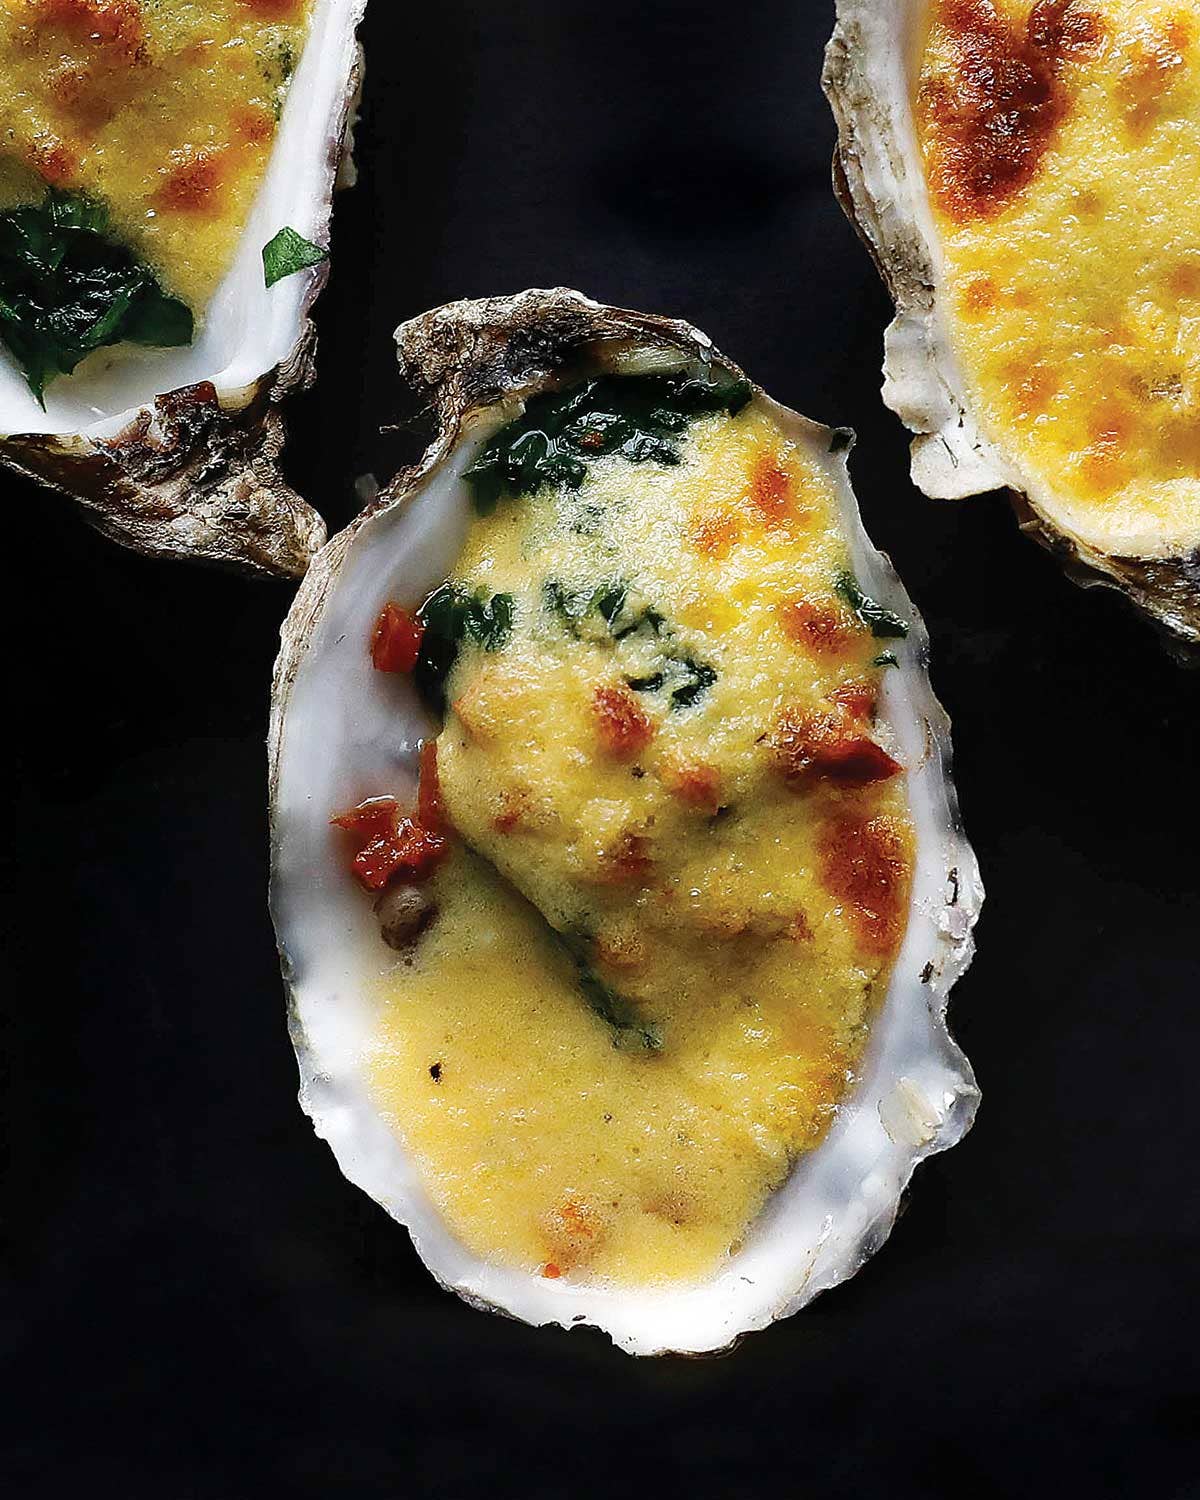 Broiled Oysters with Spinach and Brown Butter Hollandaise